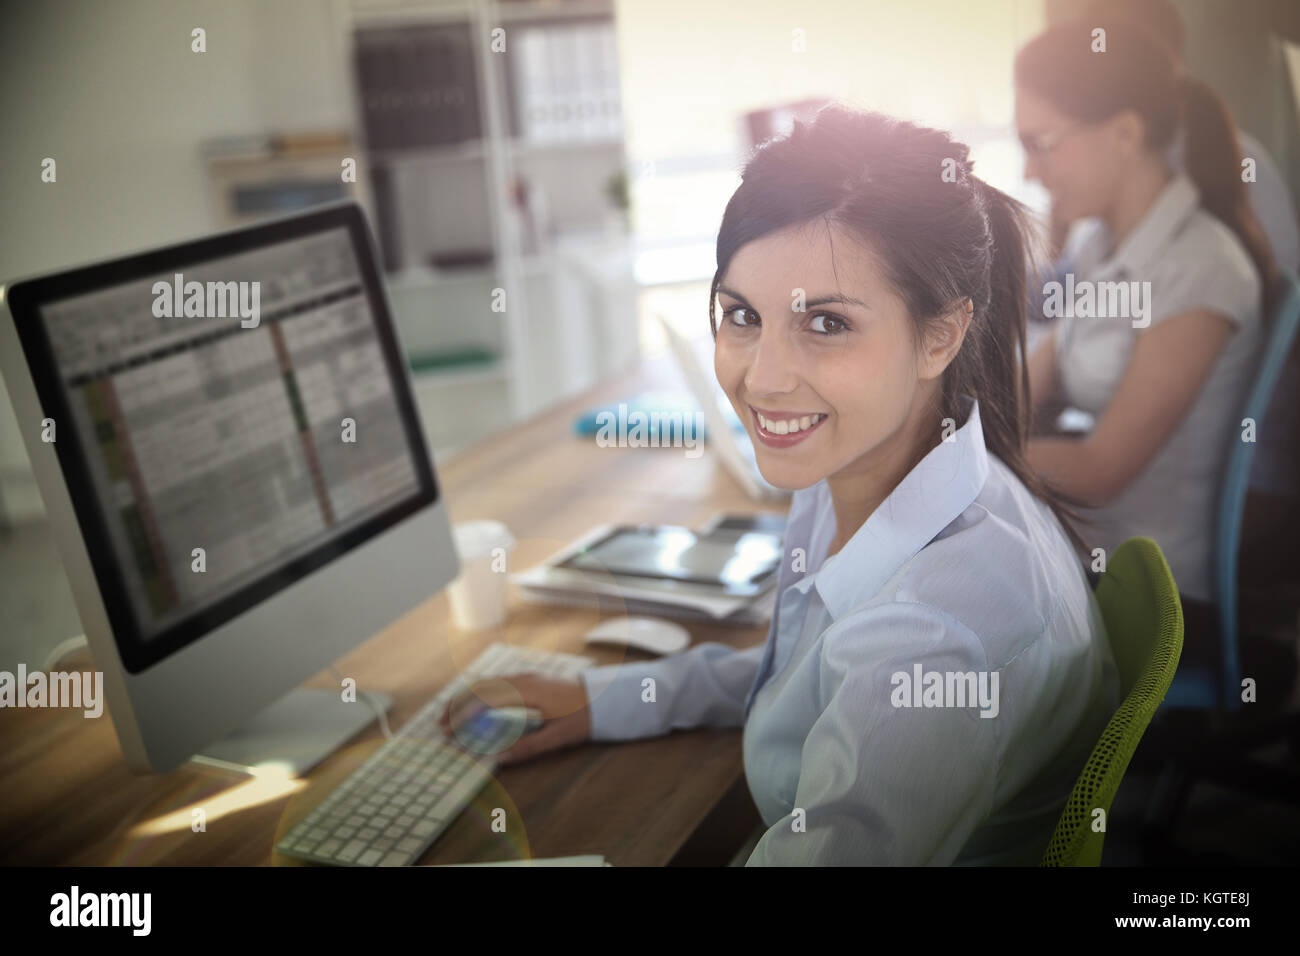 Cheerful young woman attending business training Stock Photo